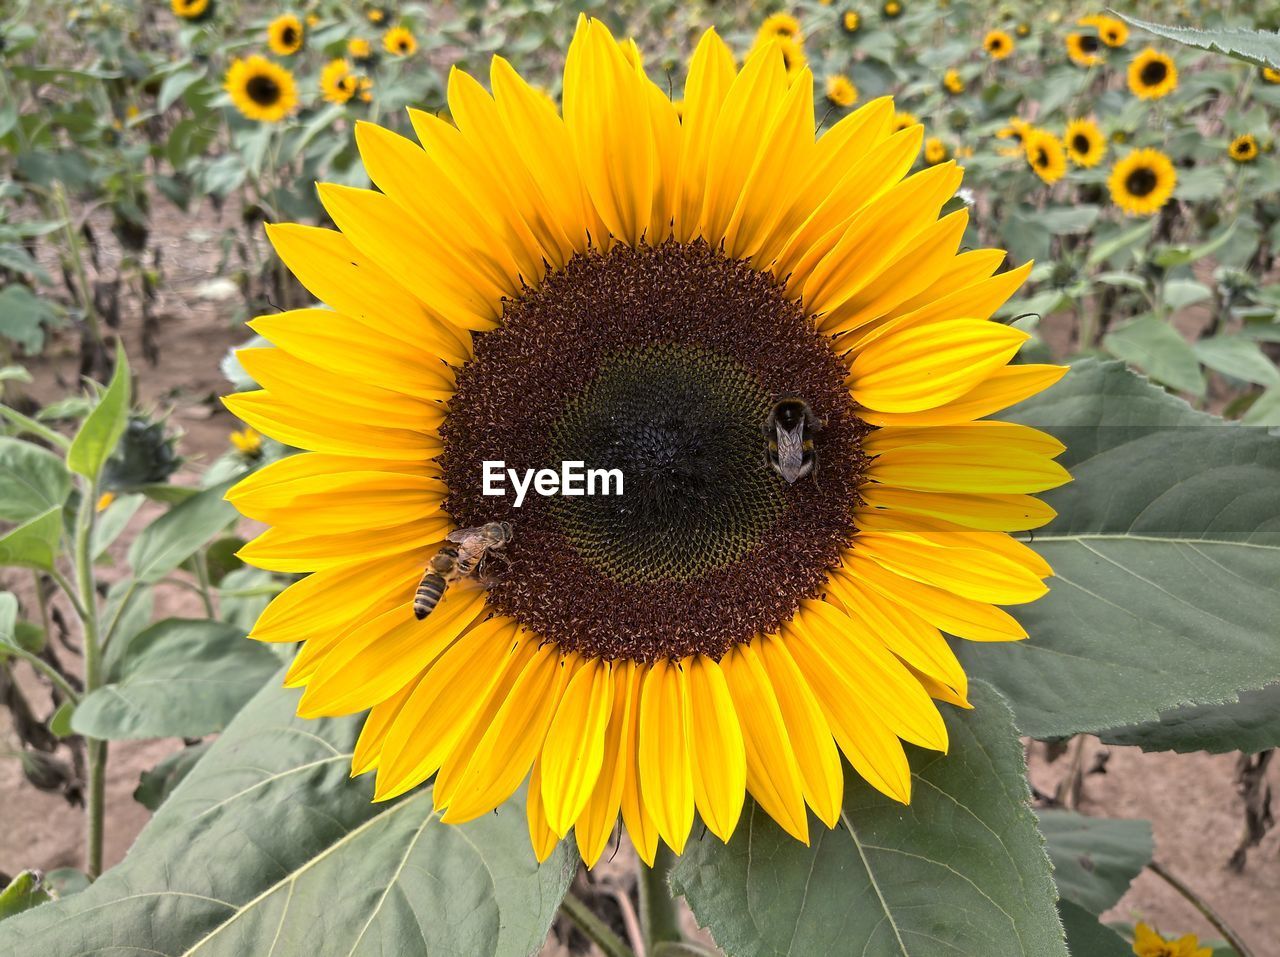 CLOSE-UP OF BEE POLLINATING ON SUNFLOWER IN BLOOM